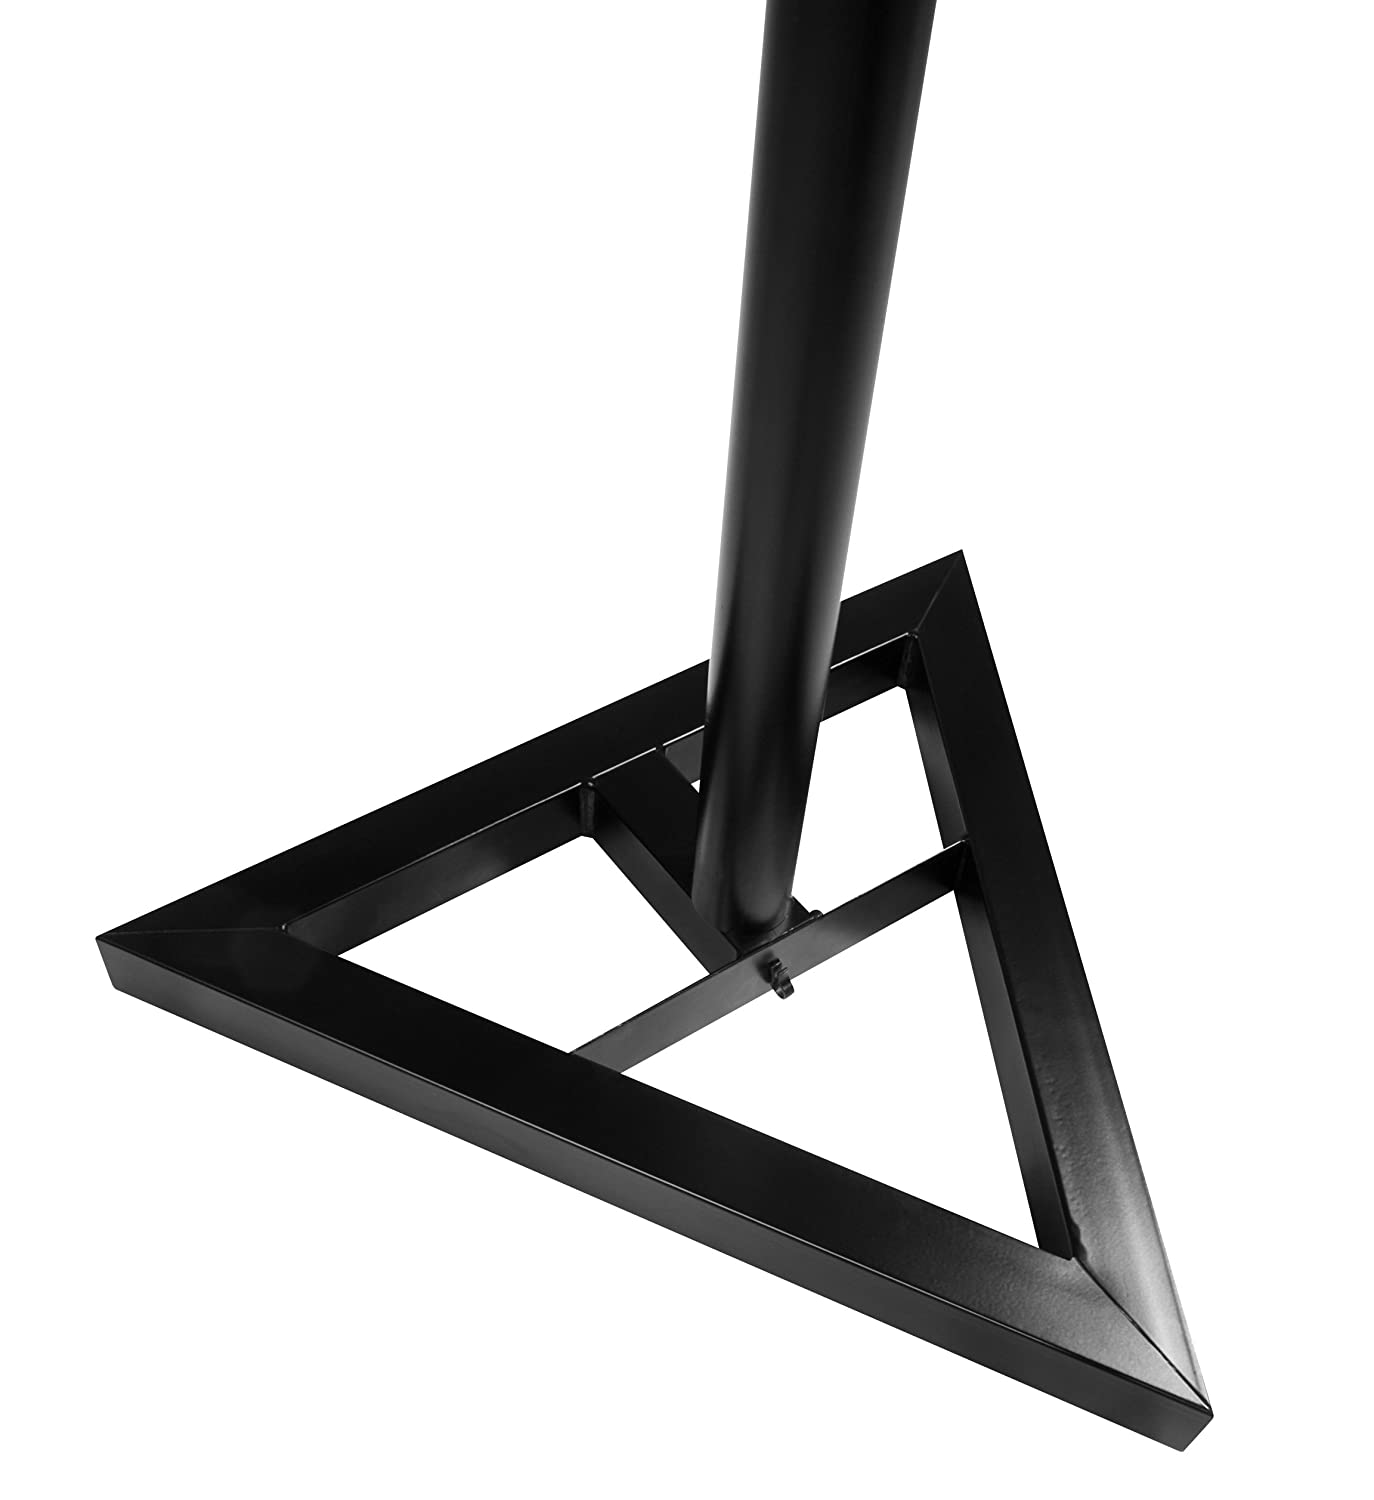 Ultimate Support JS-MS70 - JamStands Adjustable Monitor Stand PAIR, Black [Special Order]